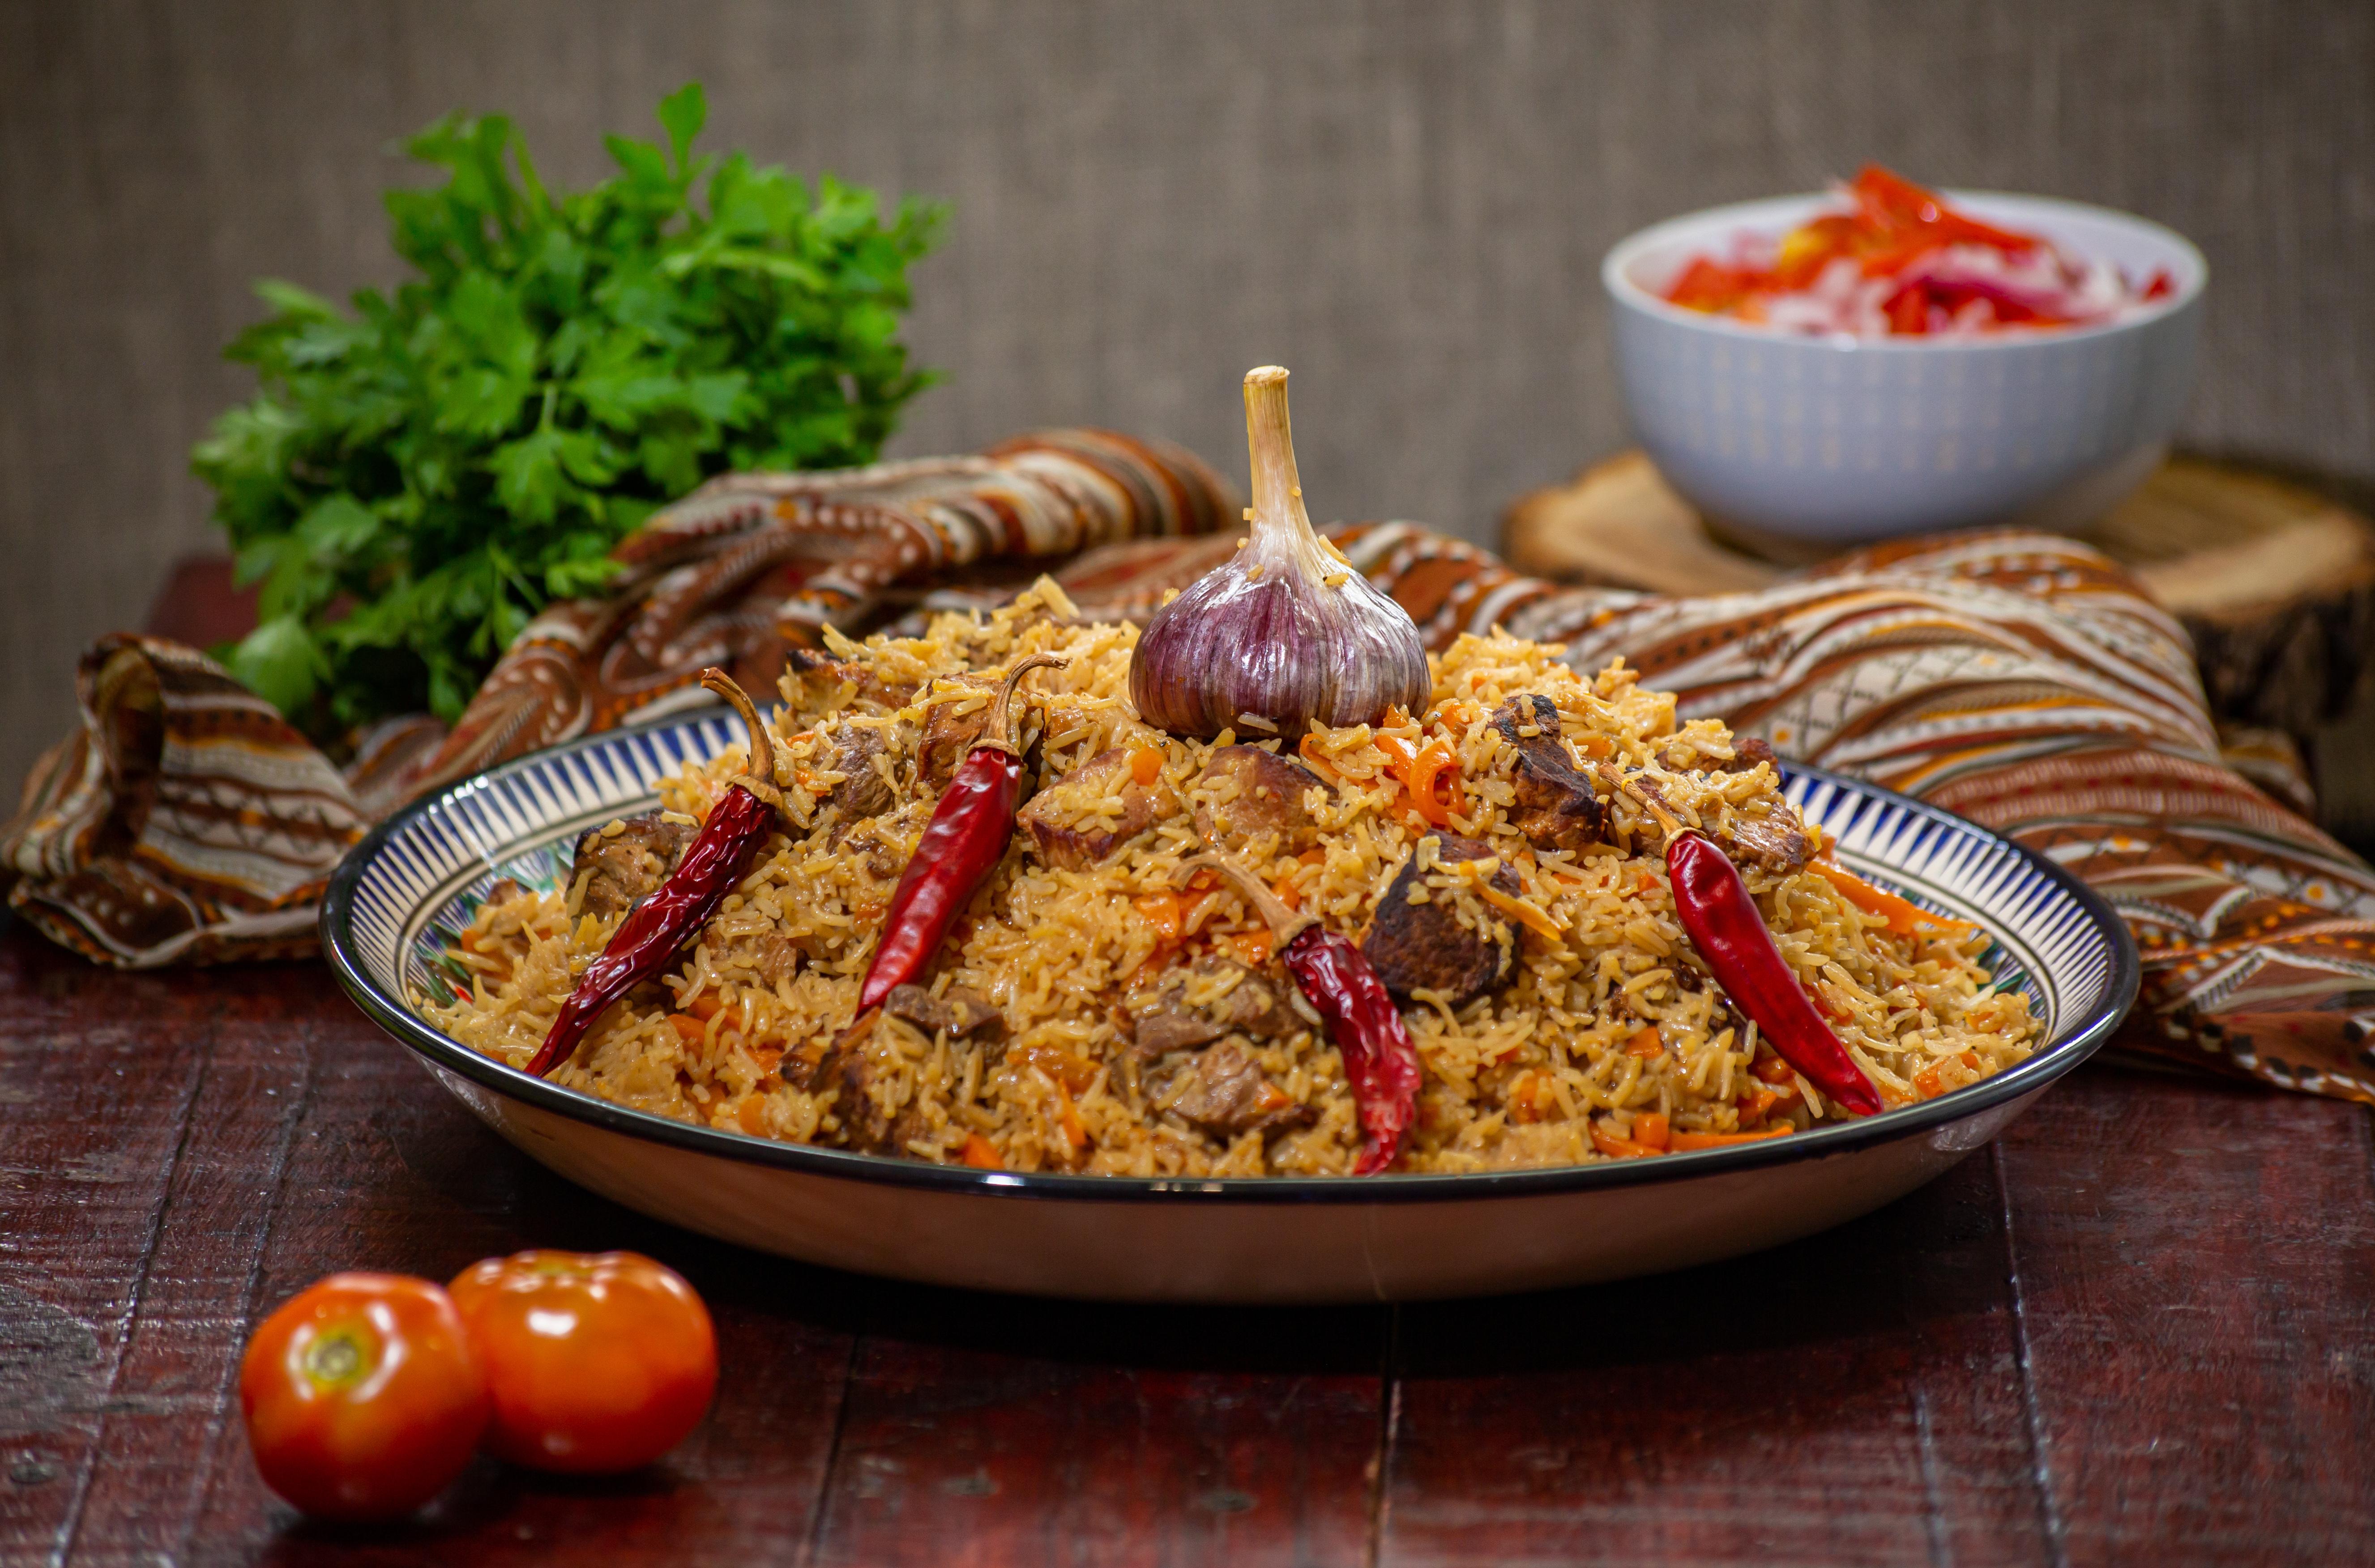 Plov - typical dish from Central Asia